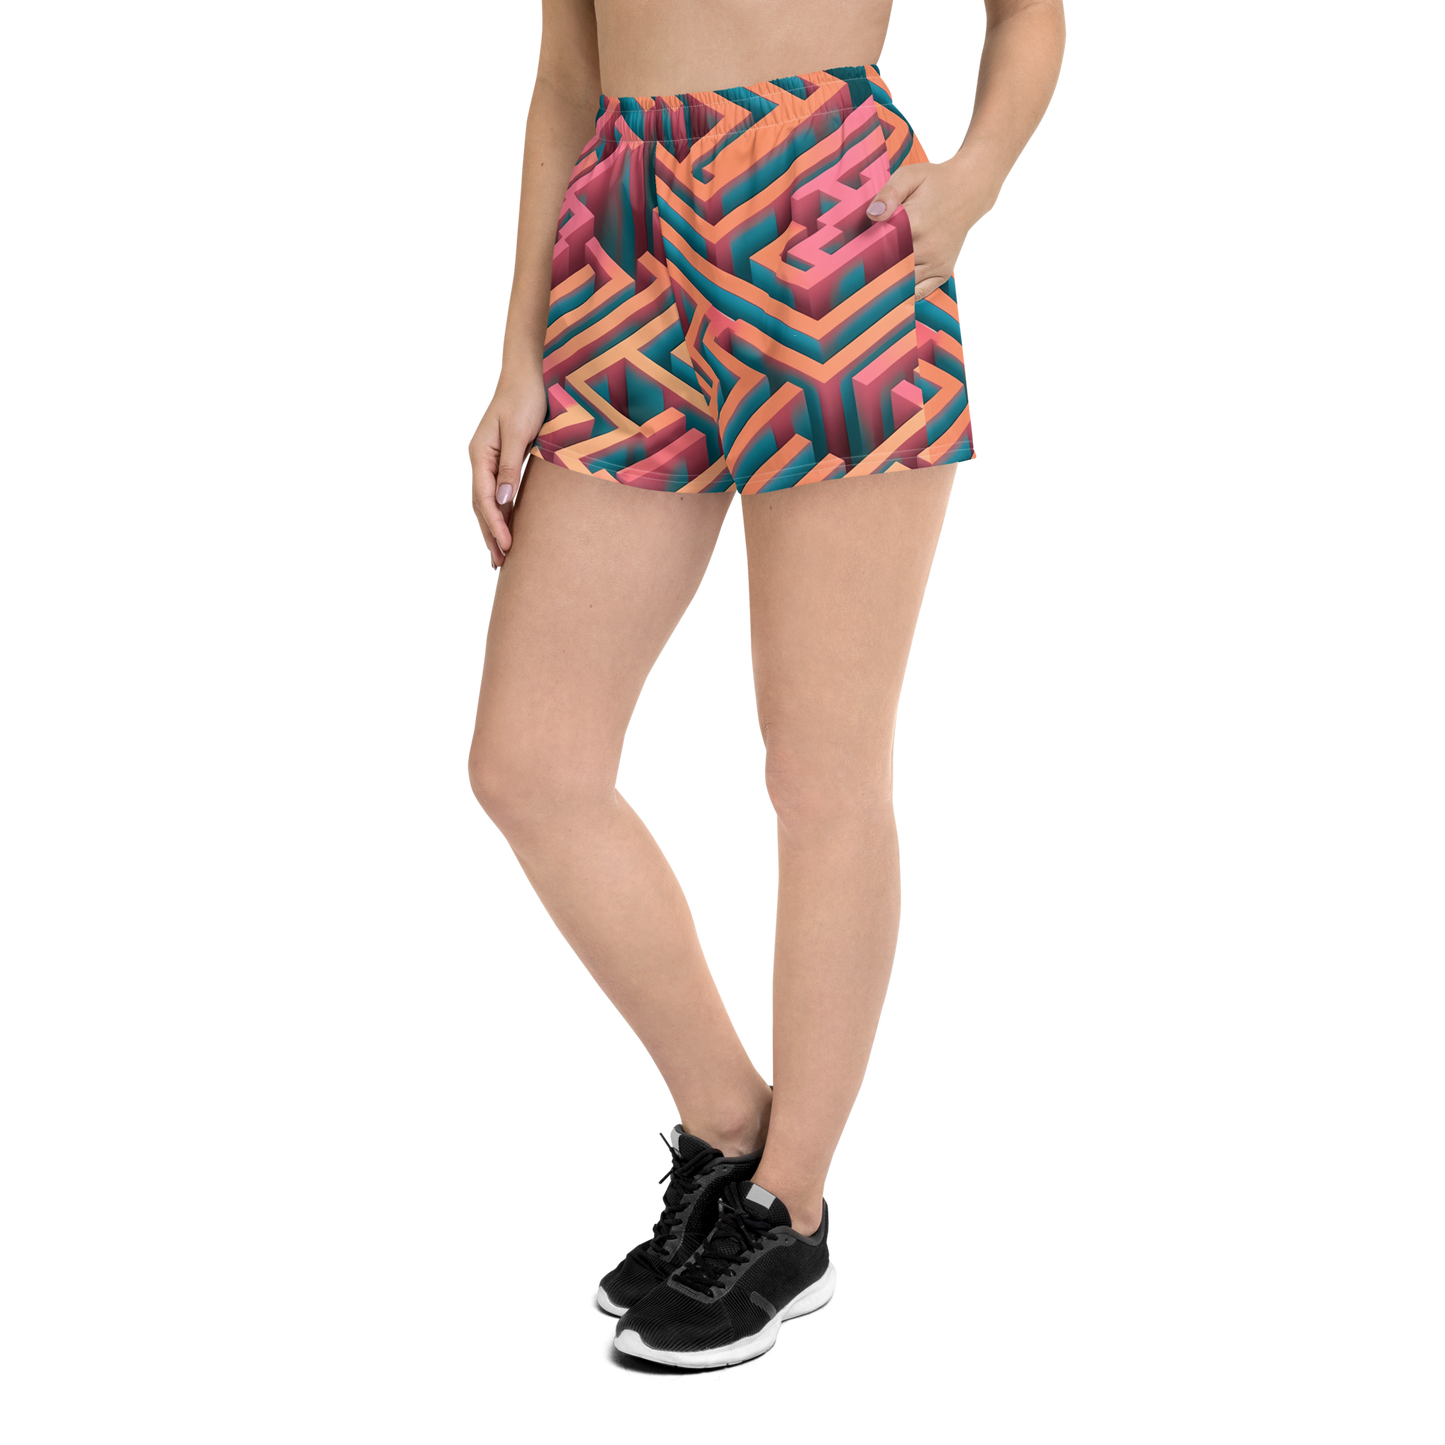 3D Maze Illusion | 3D Patterns | All-Over Print Women’s Recycled Athletic Shorts - #1